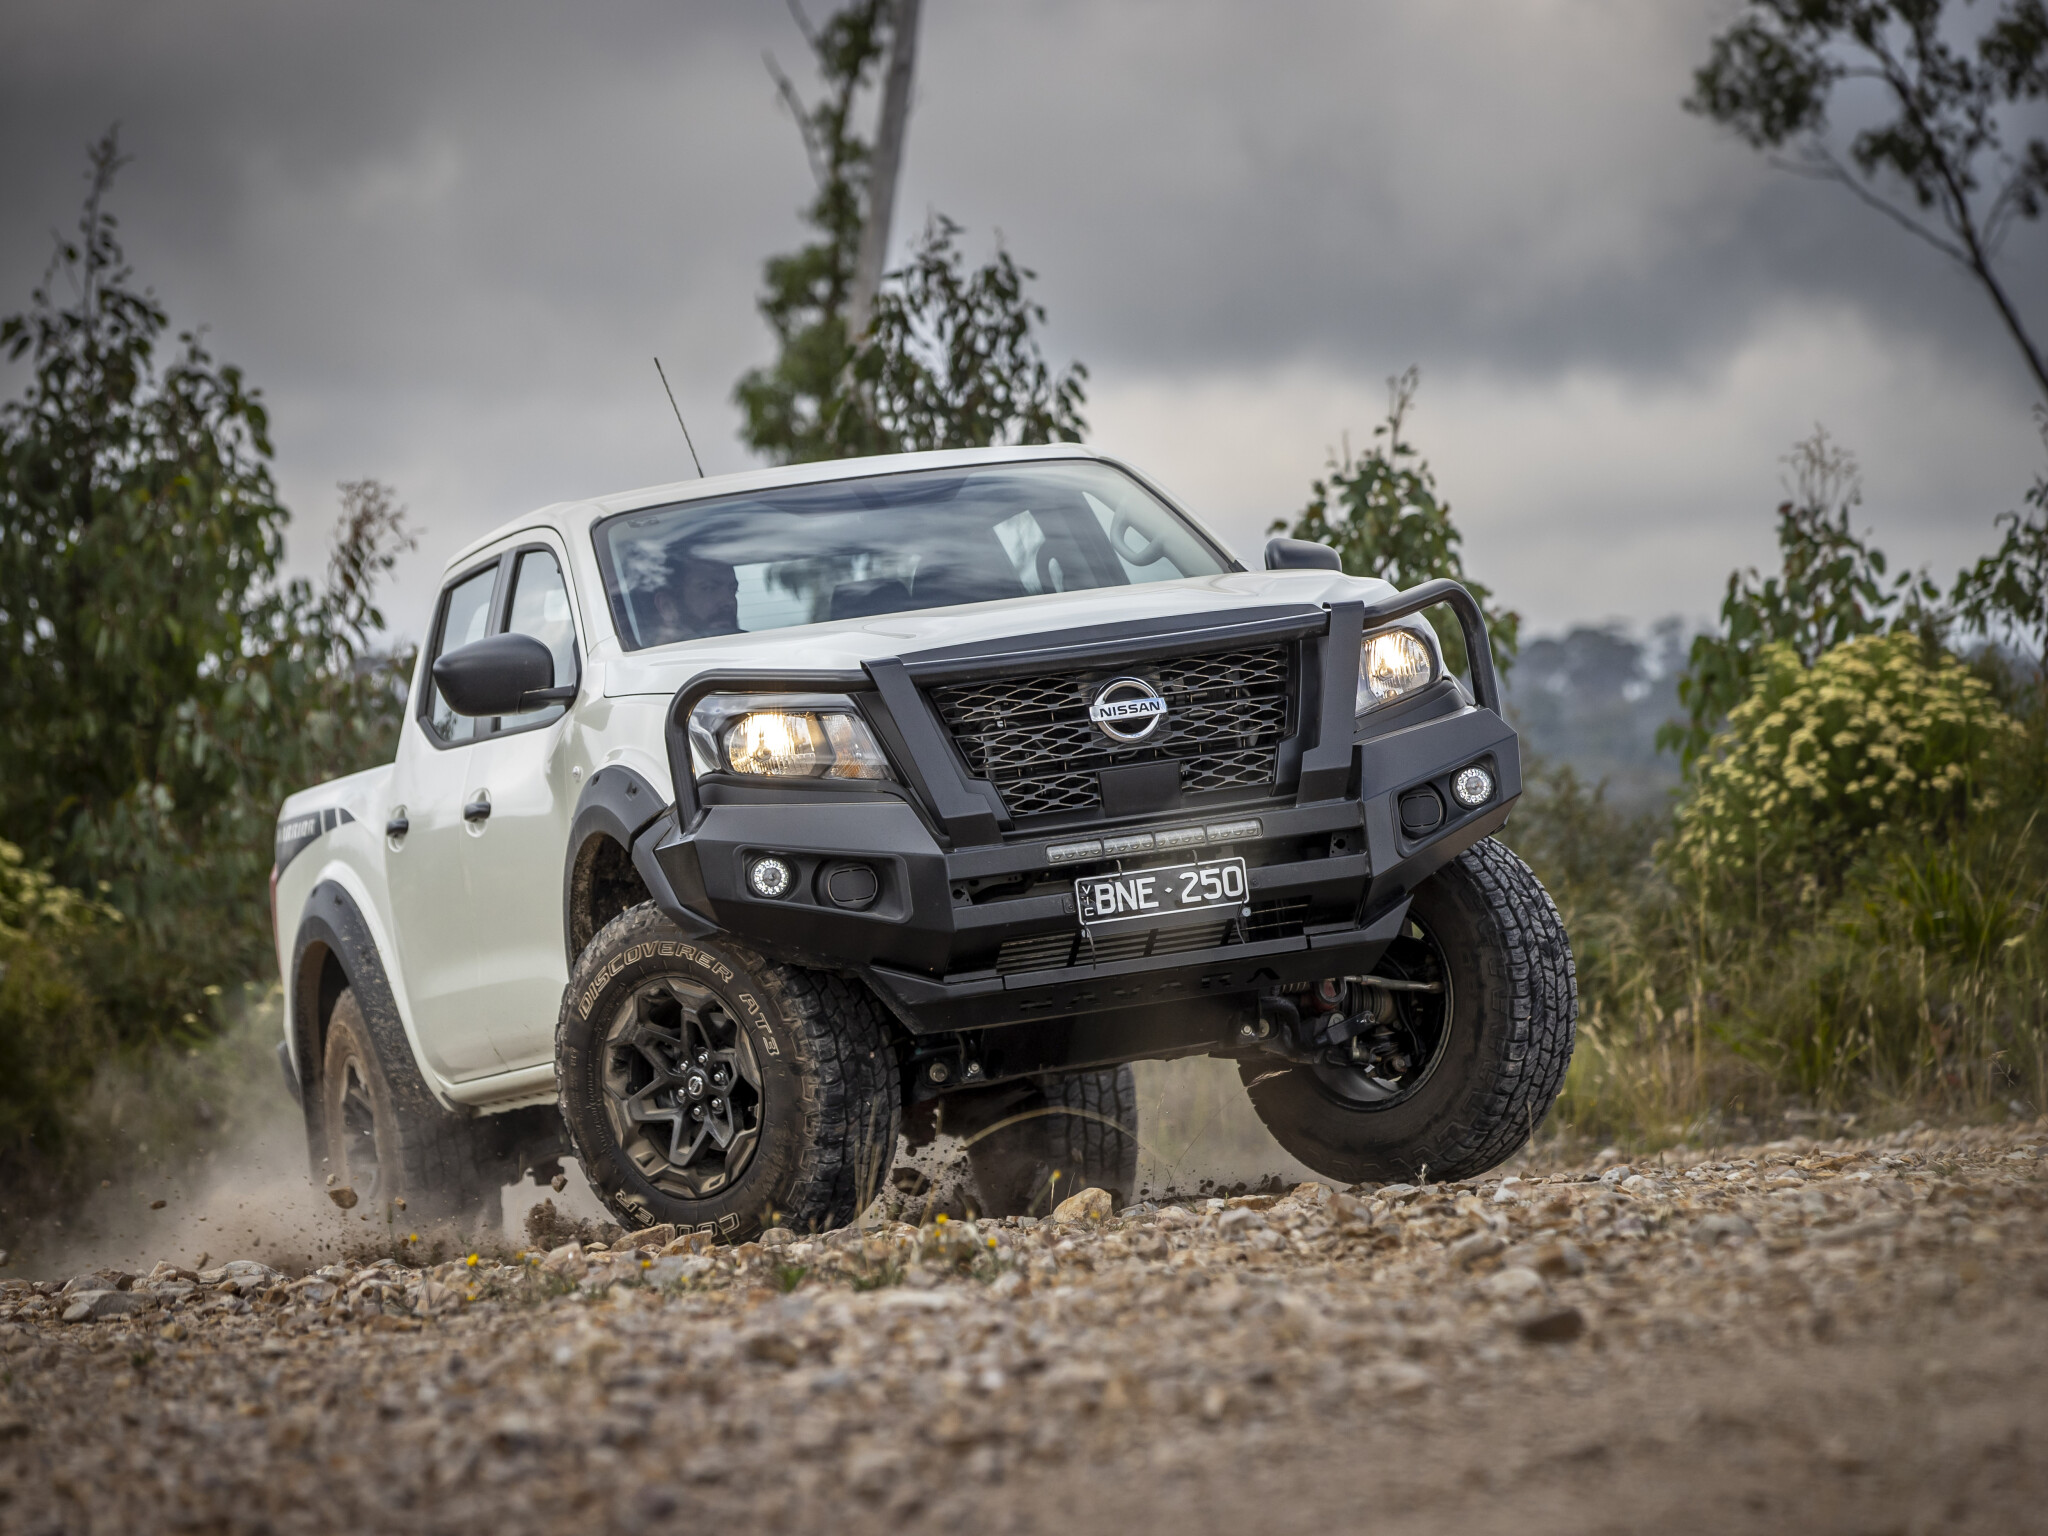 Nissan Navara Review, Price & Features